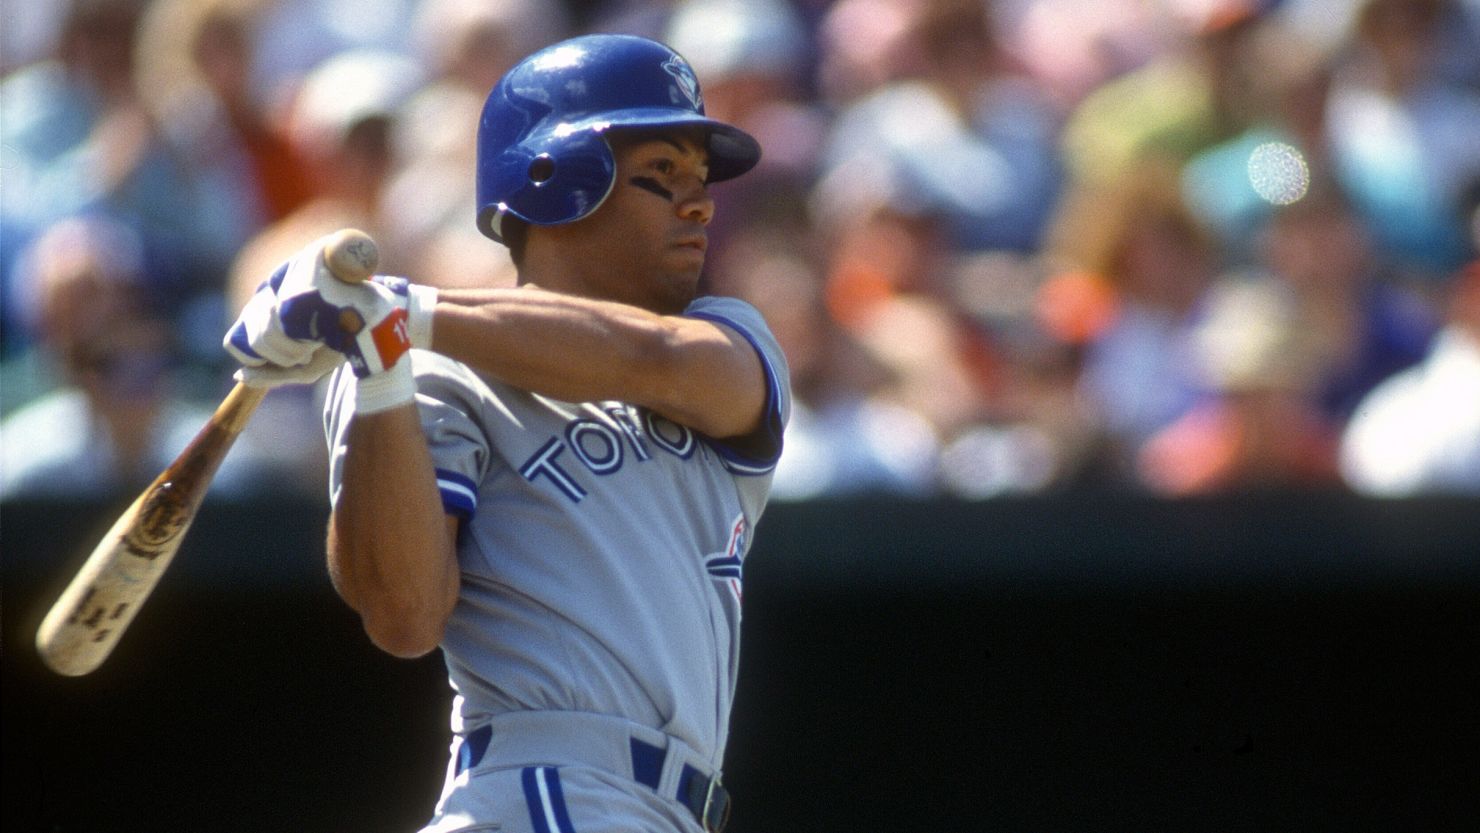 Roberto Alomar #12 of the Toronto Blue Jays bats against the Baltimore Orioles during an MLB game circa 1995 at Oriole Park at Camden Yards in Baltimore, Maryland.